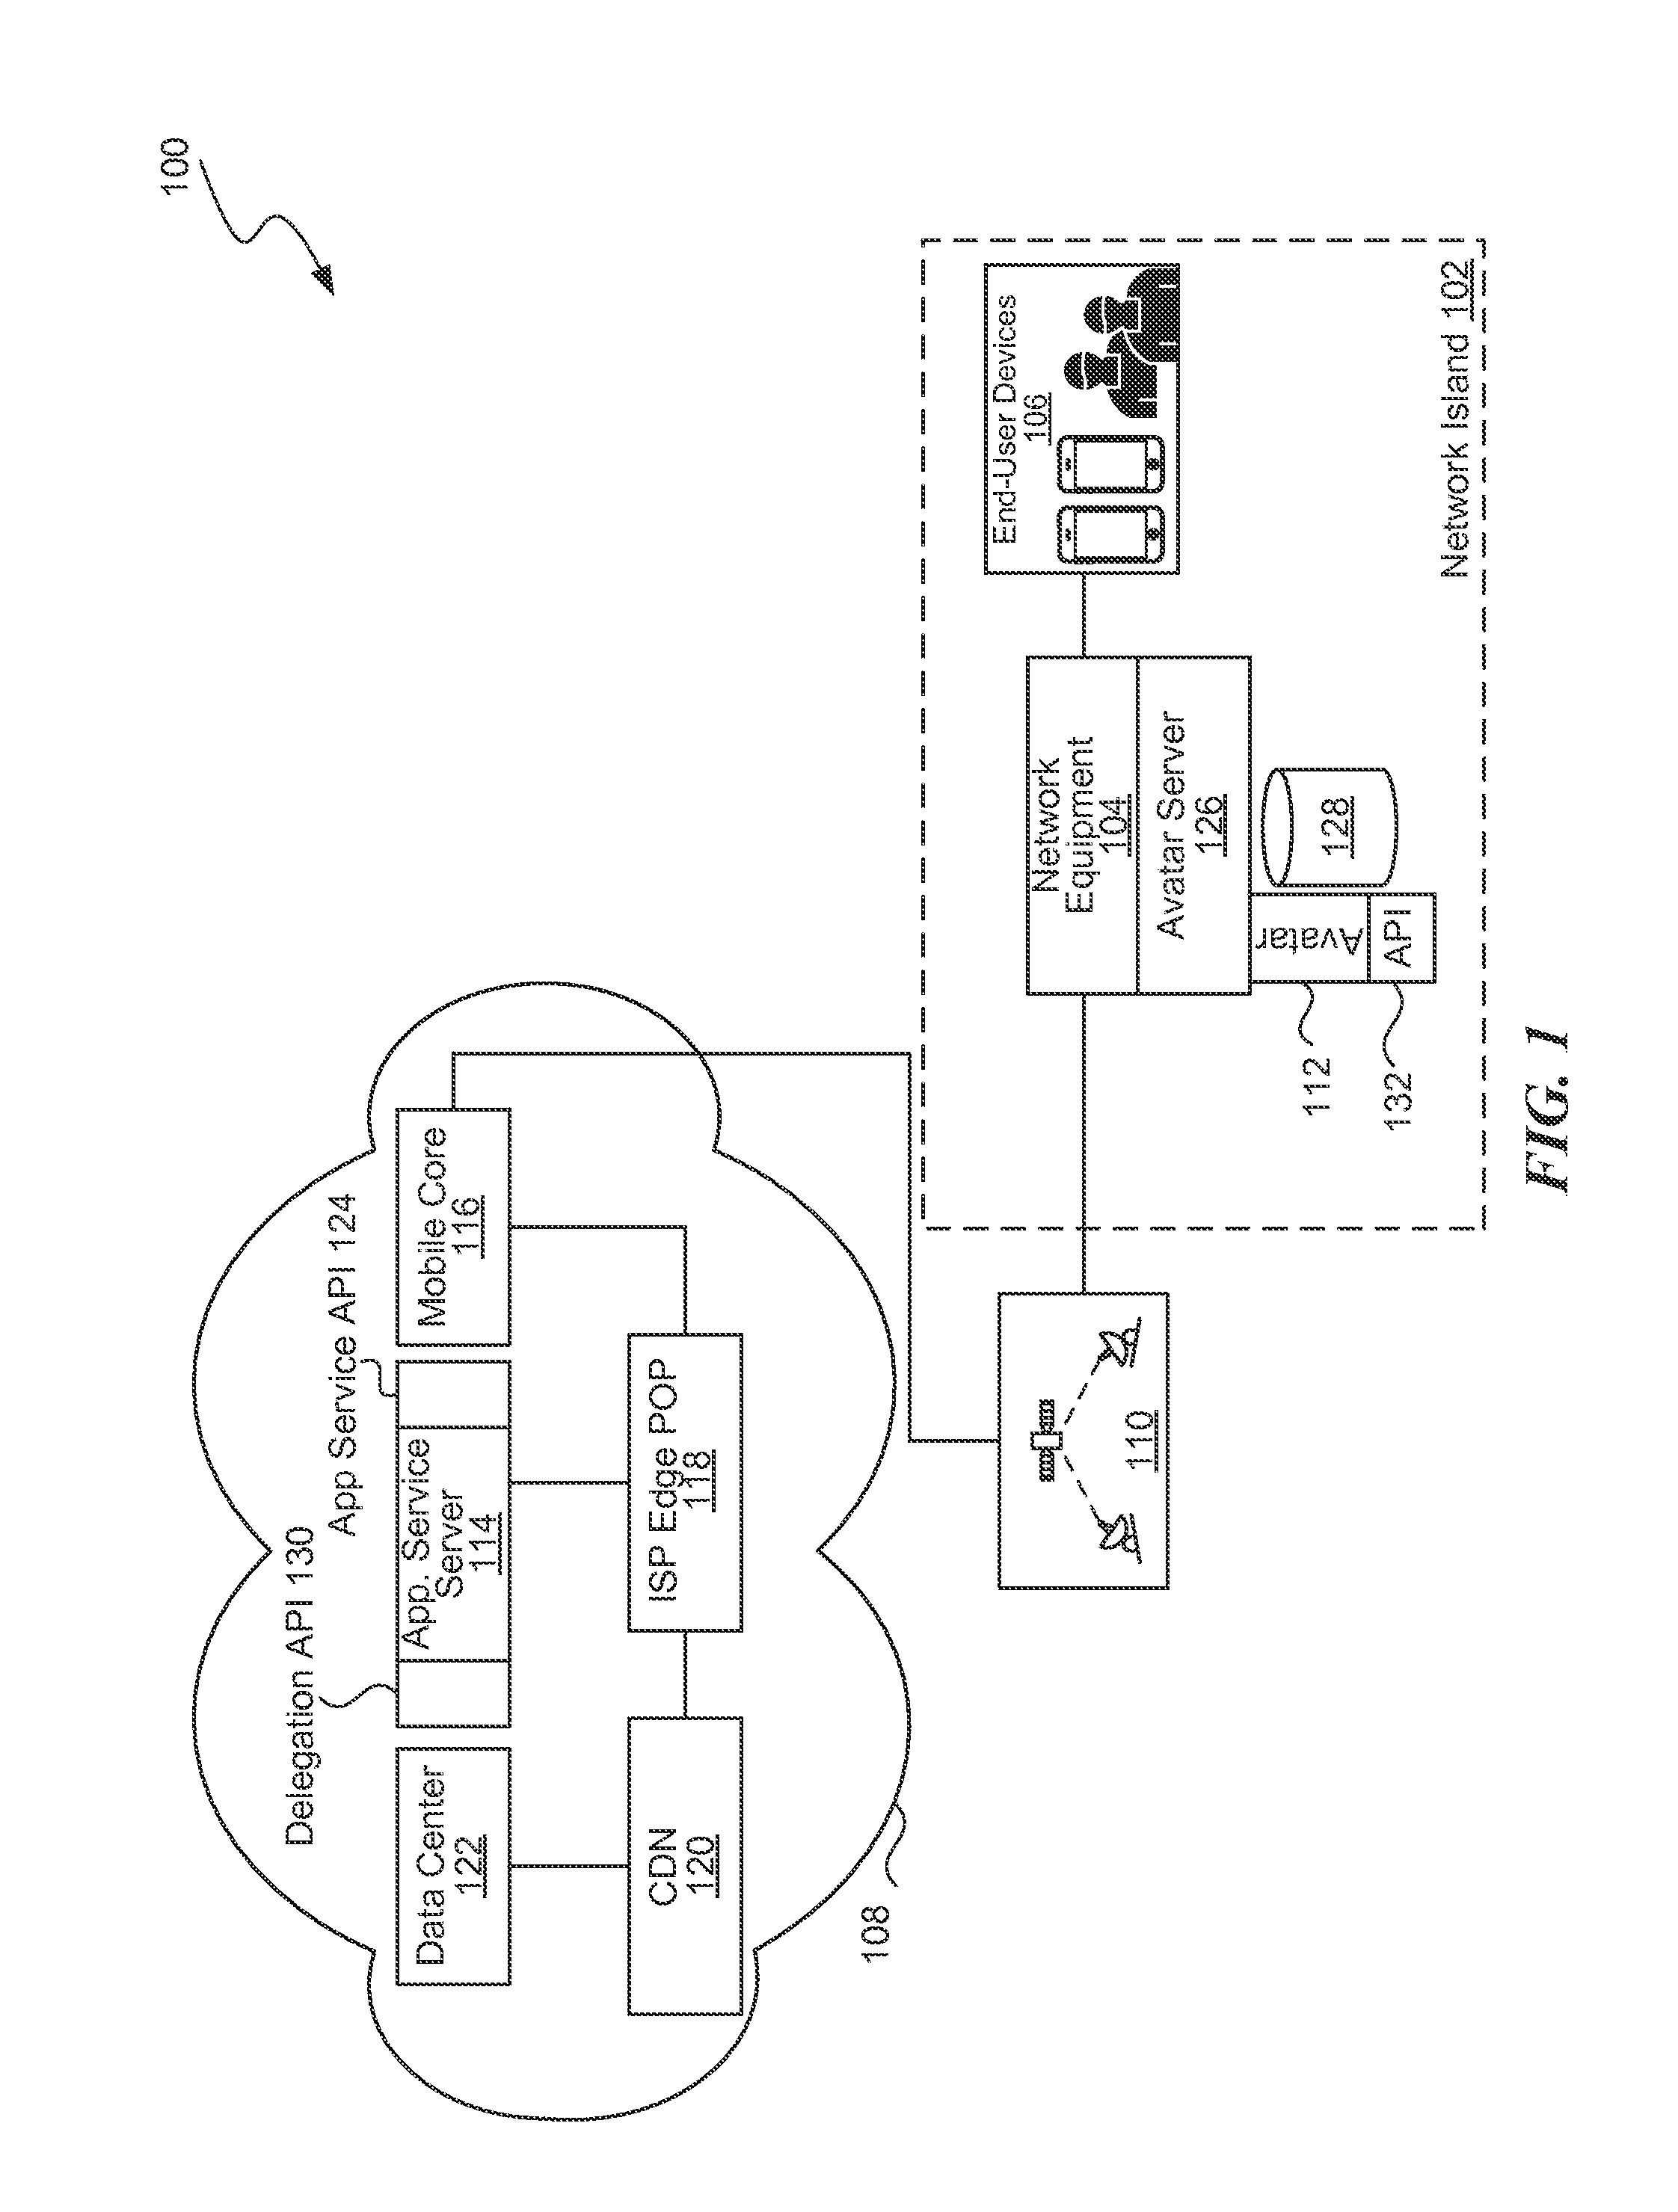 Application service delivery through an application service avatar